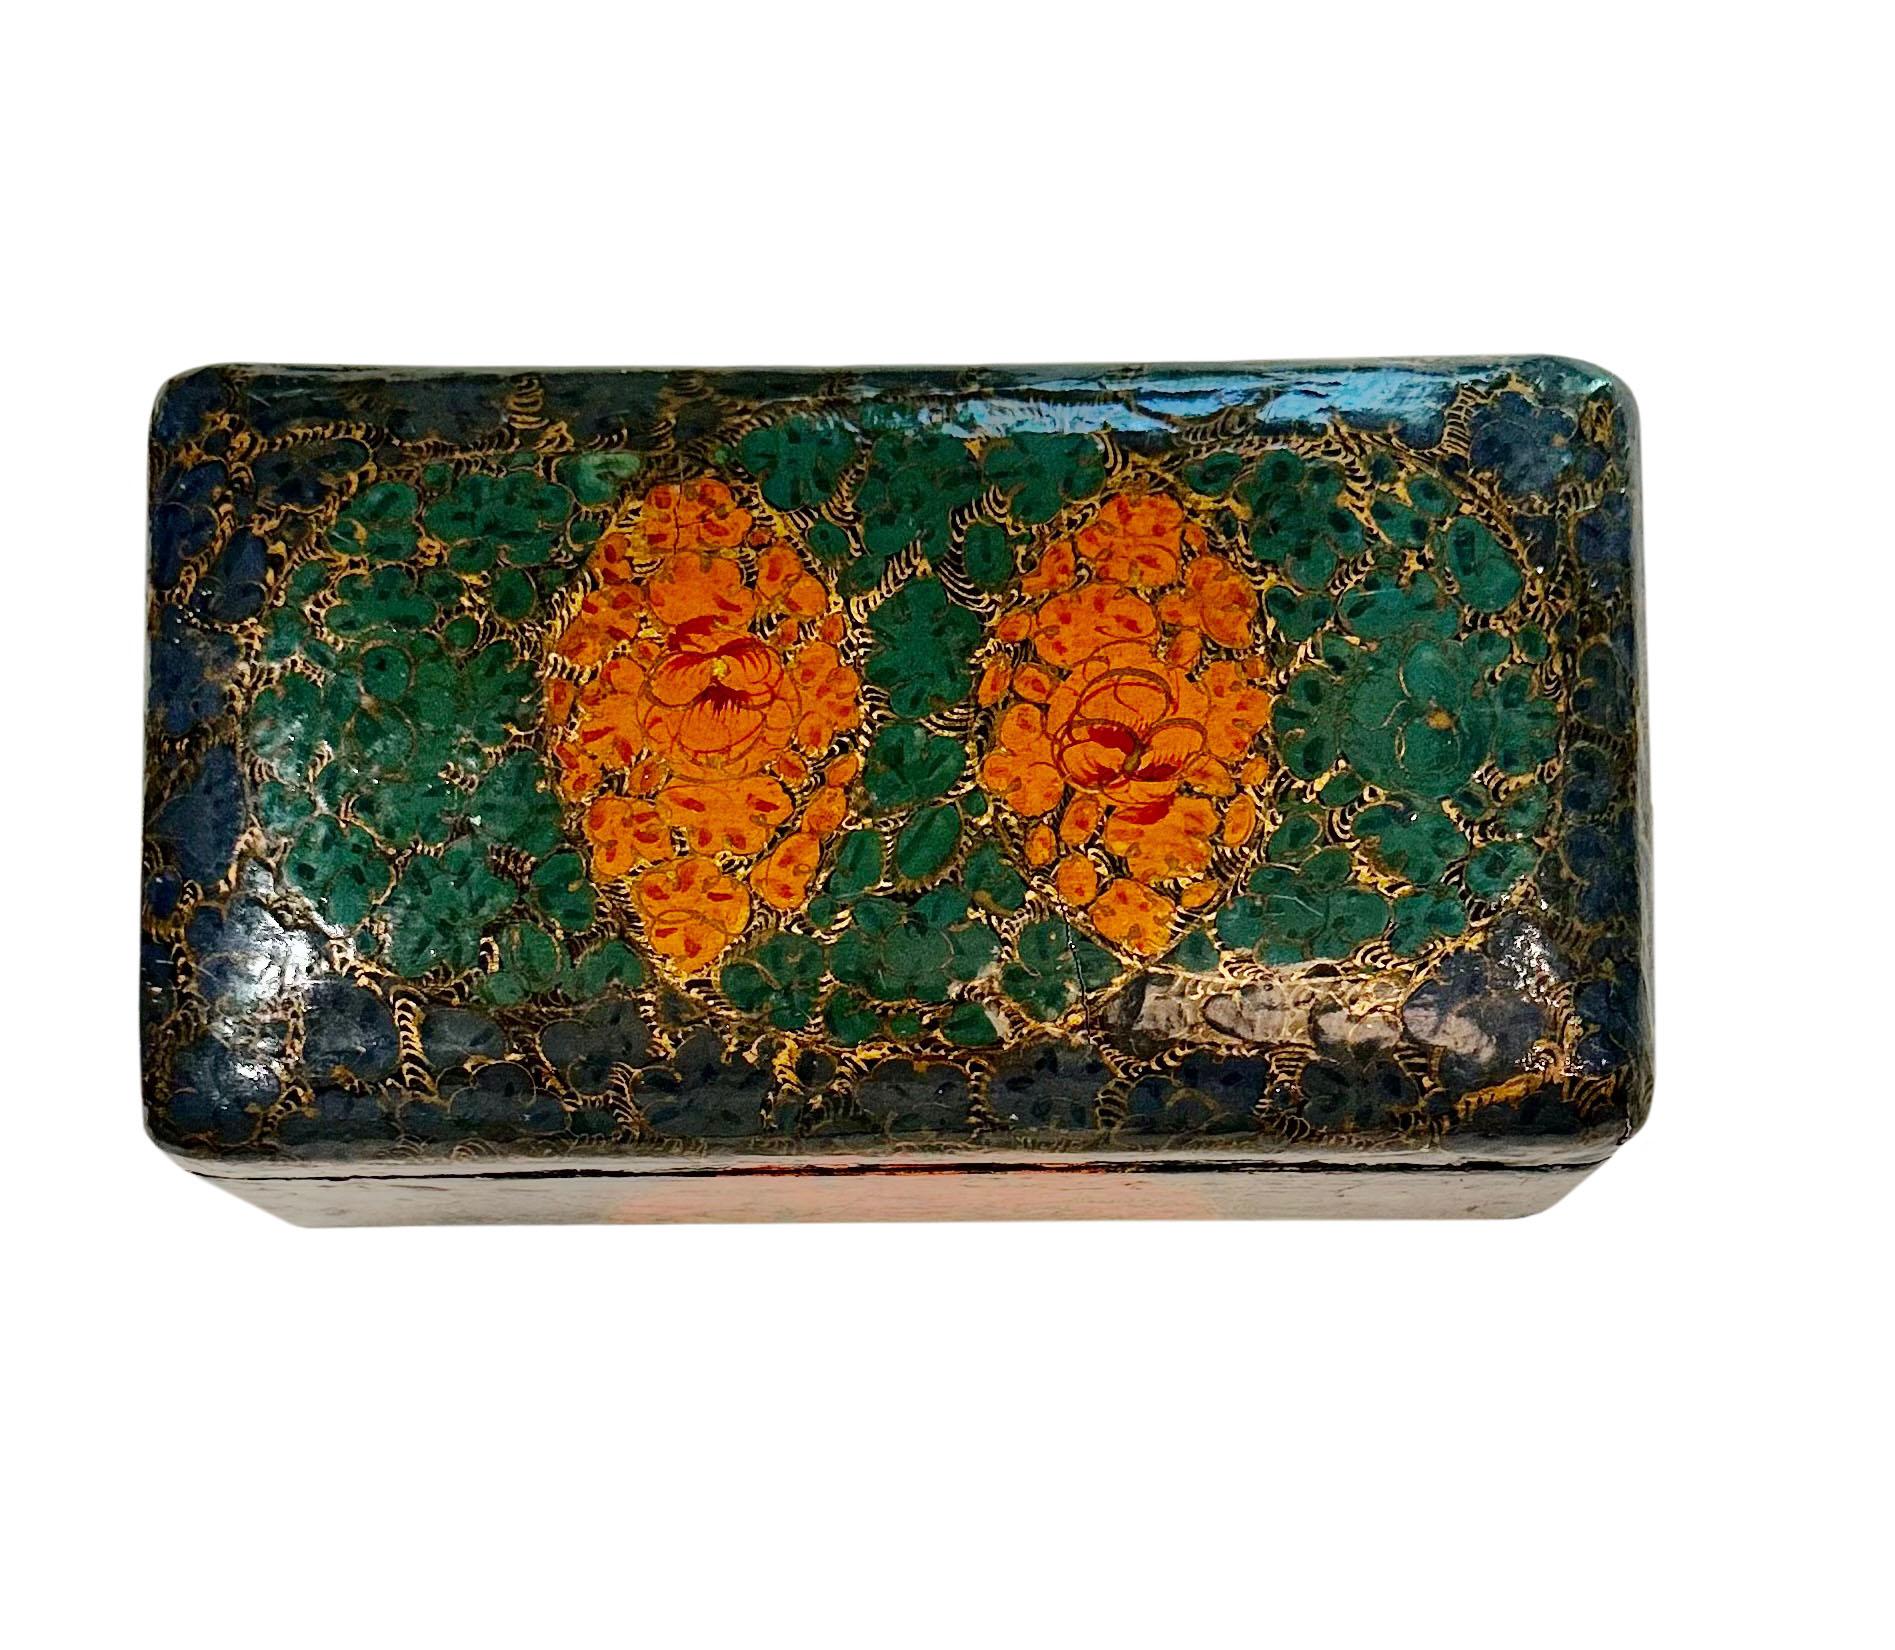 This box is wonderful. Colors are great orange, green, and gold. From Kashmir, India circa 1915 maybe earlier.